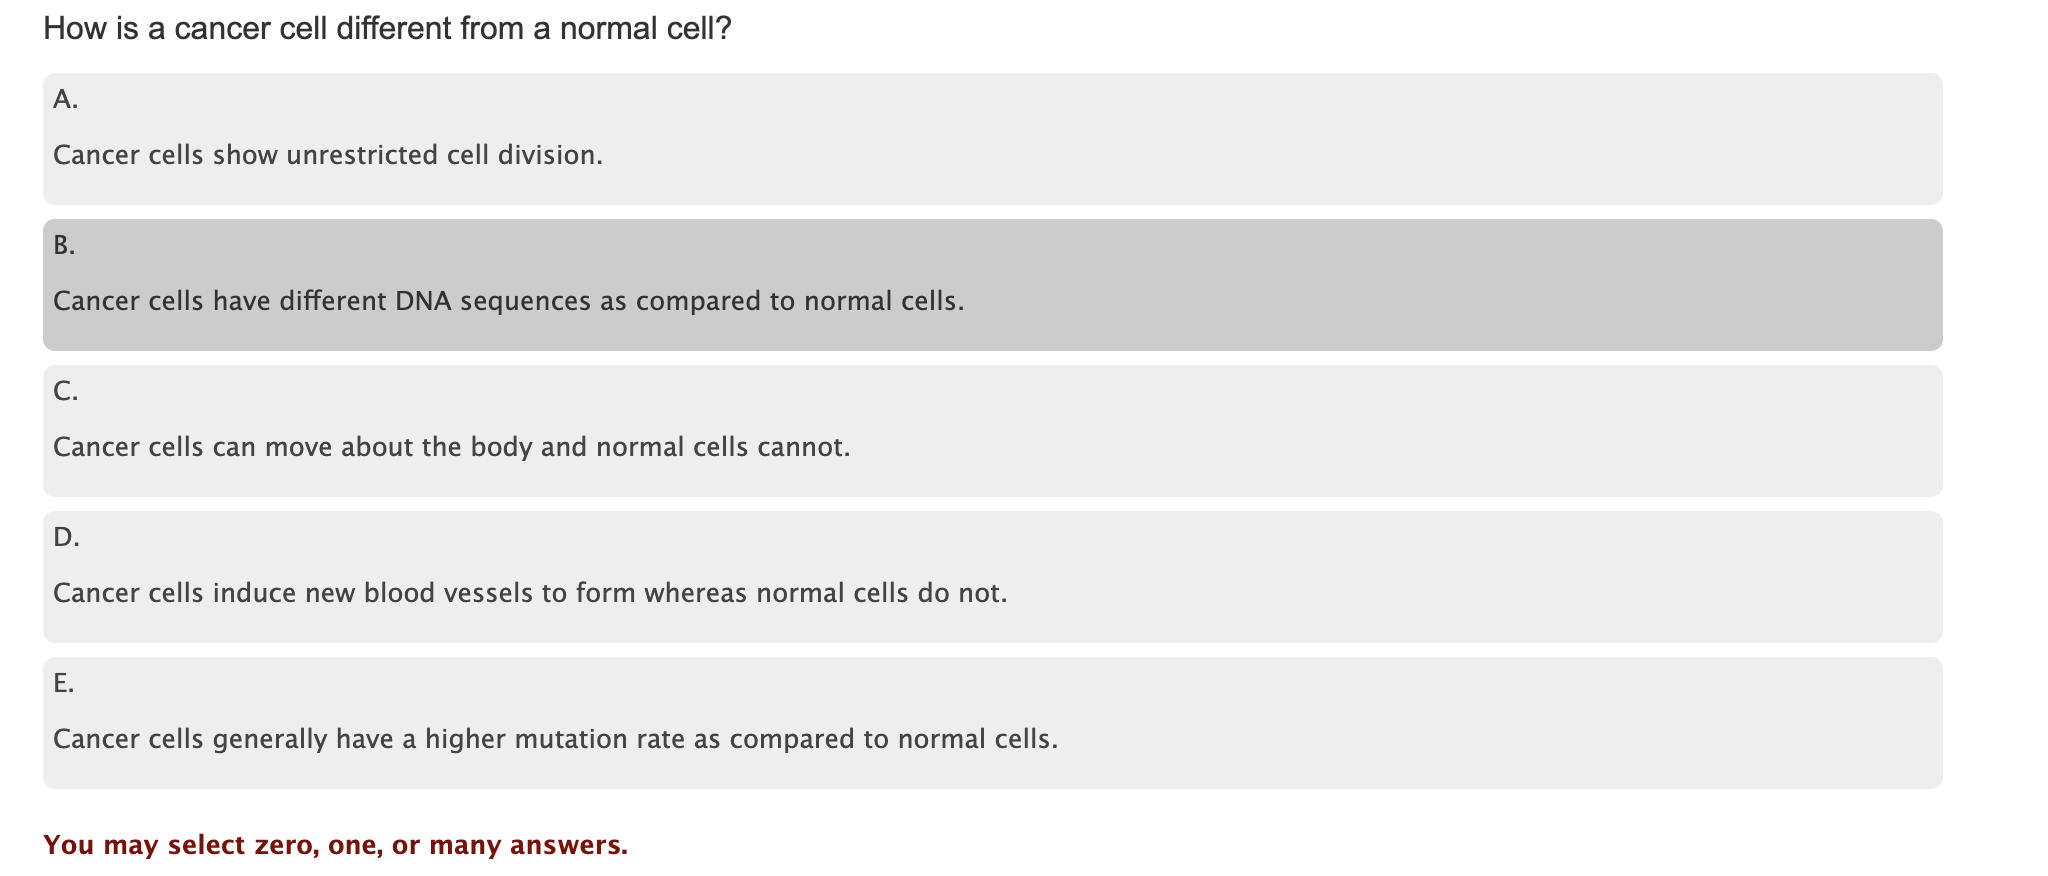 How is a cancer cell different from a normal cell?
A. Cancer cells show unrestricted cell division.
B. Cancer cells have diff